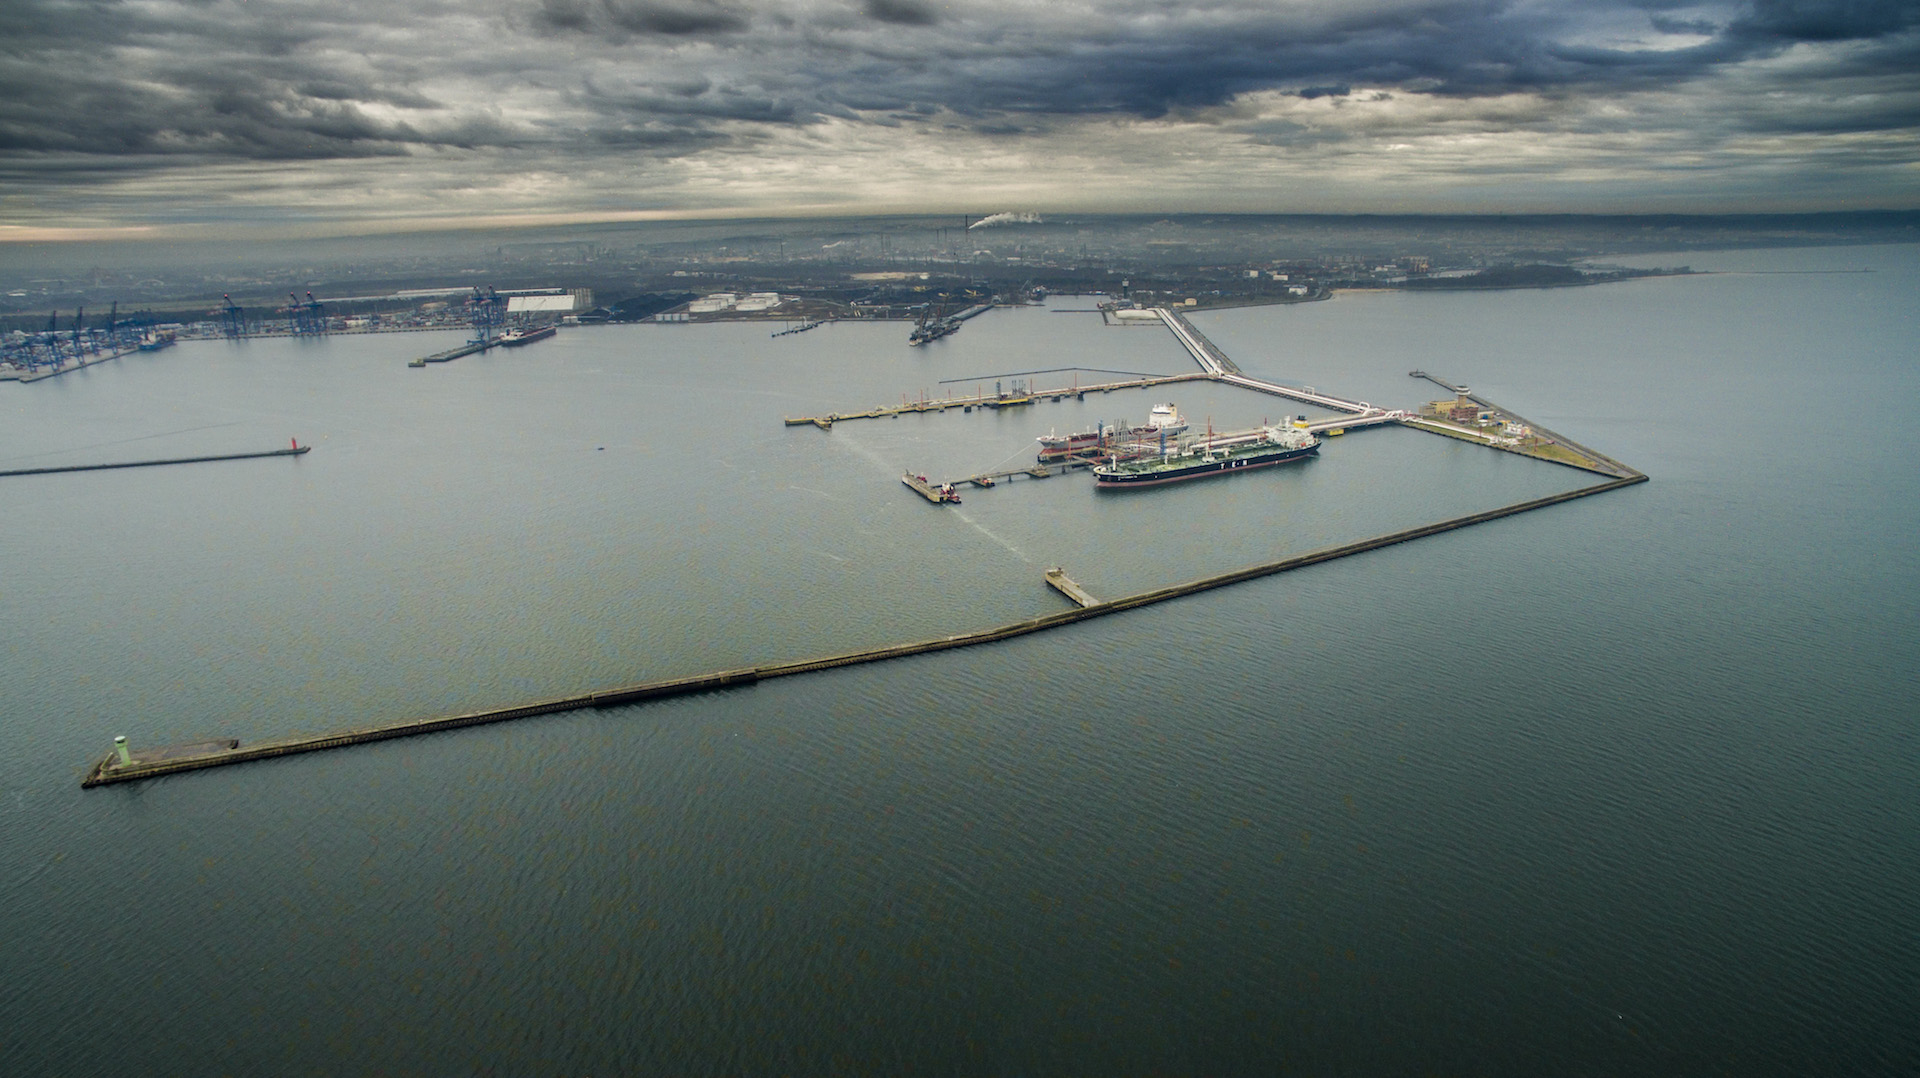 Naftoport and the PERN Oil Terminal in Gdańsk – Poland’s window on oil - MarinePoland.com